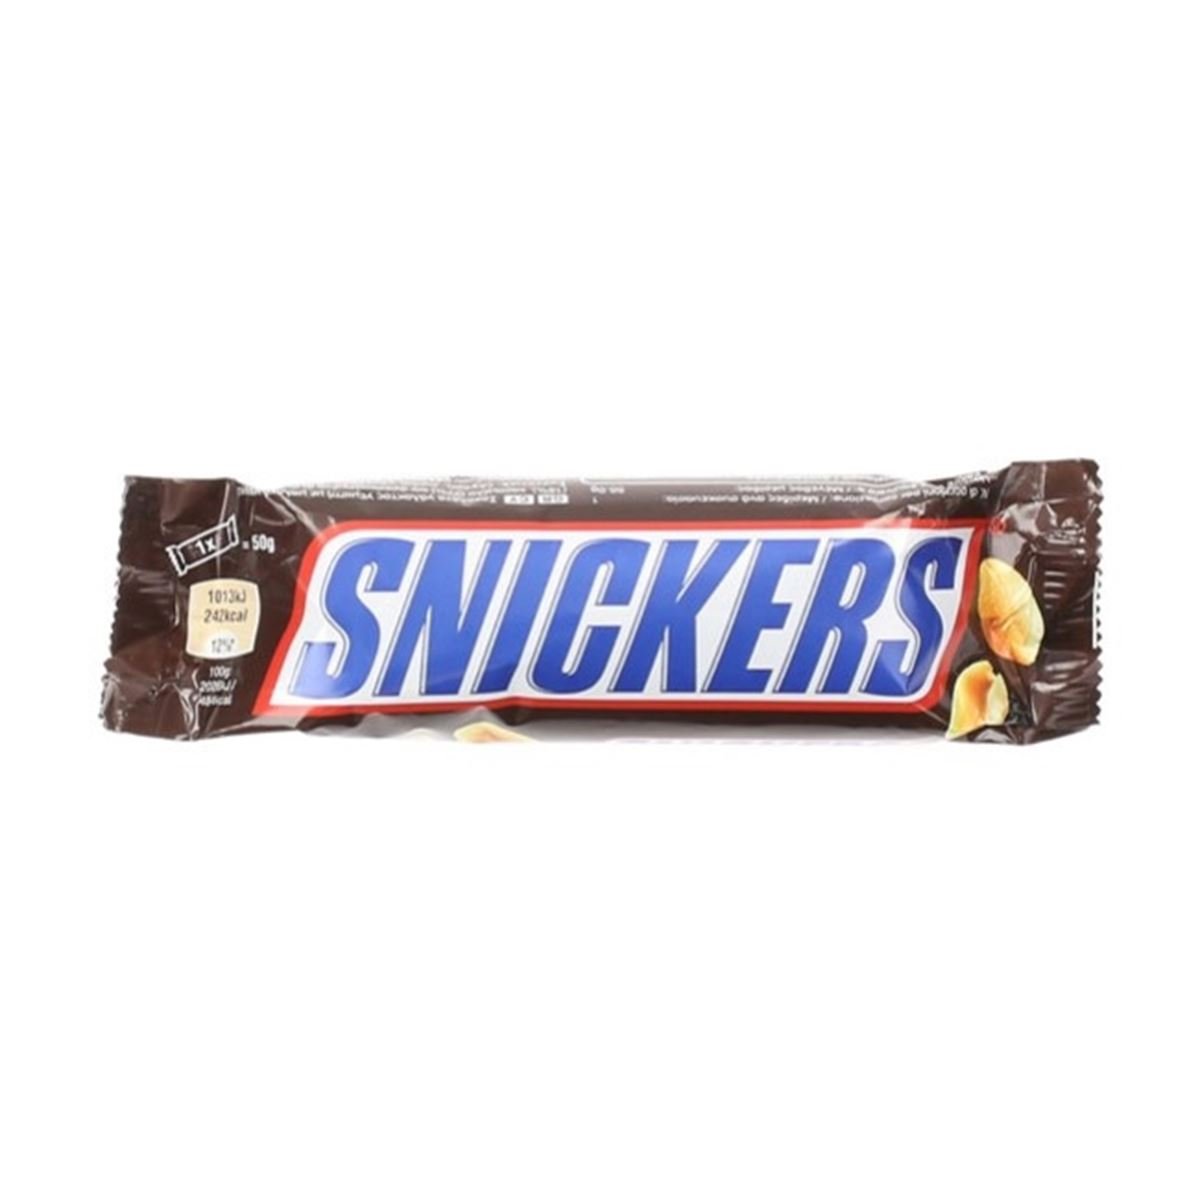 Snickers Chocolate, (50 g) (pack of 5)